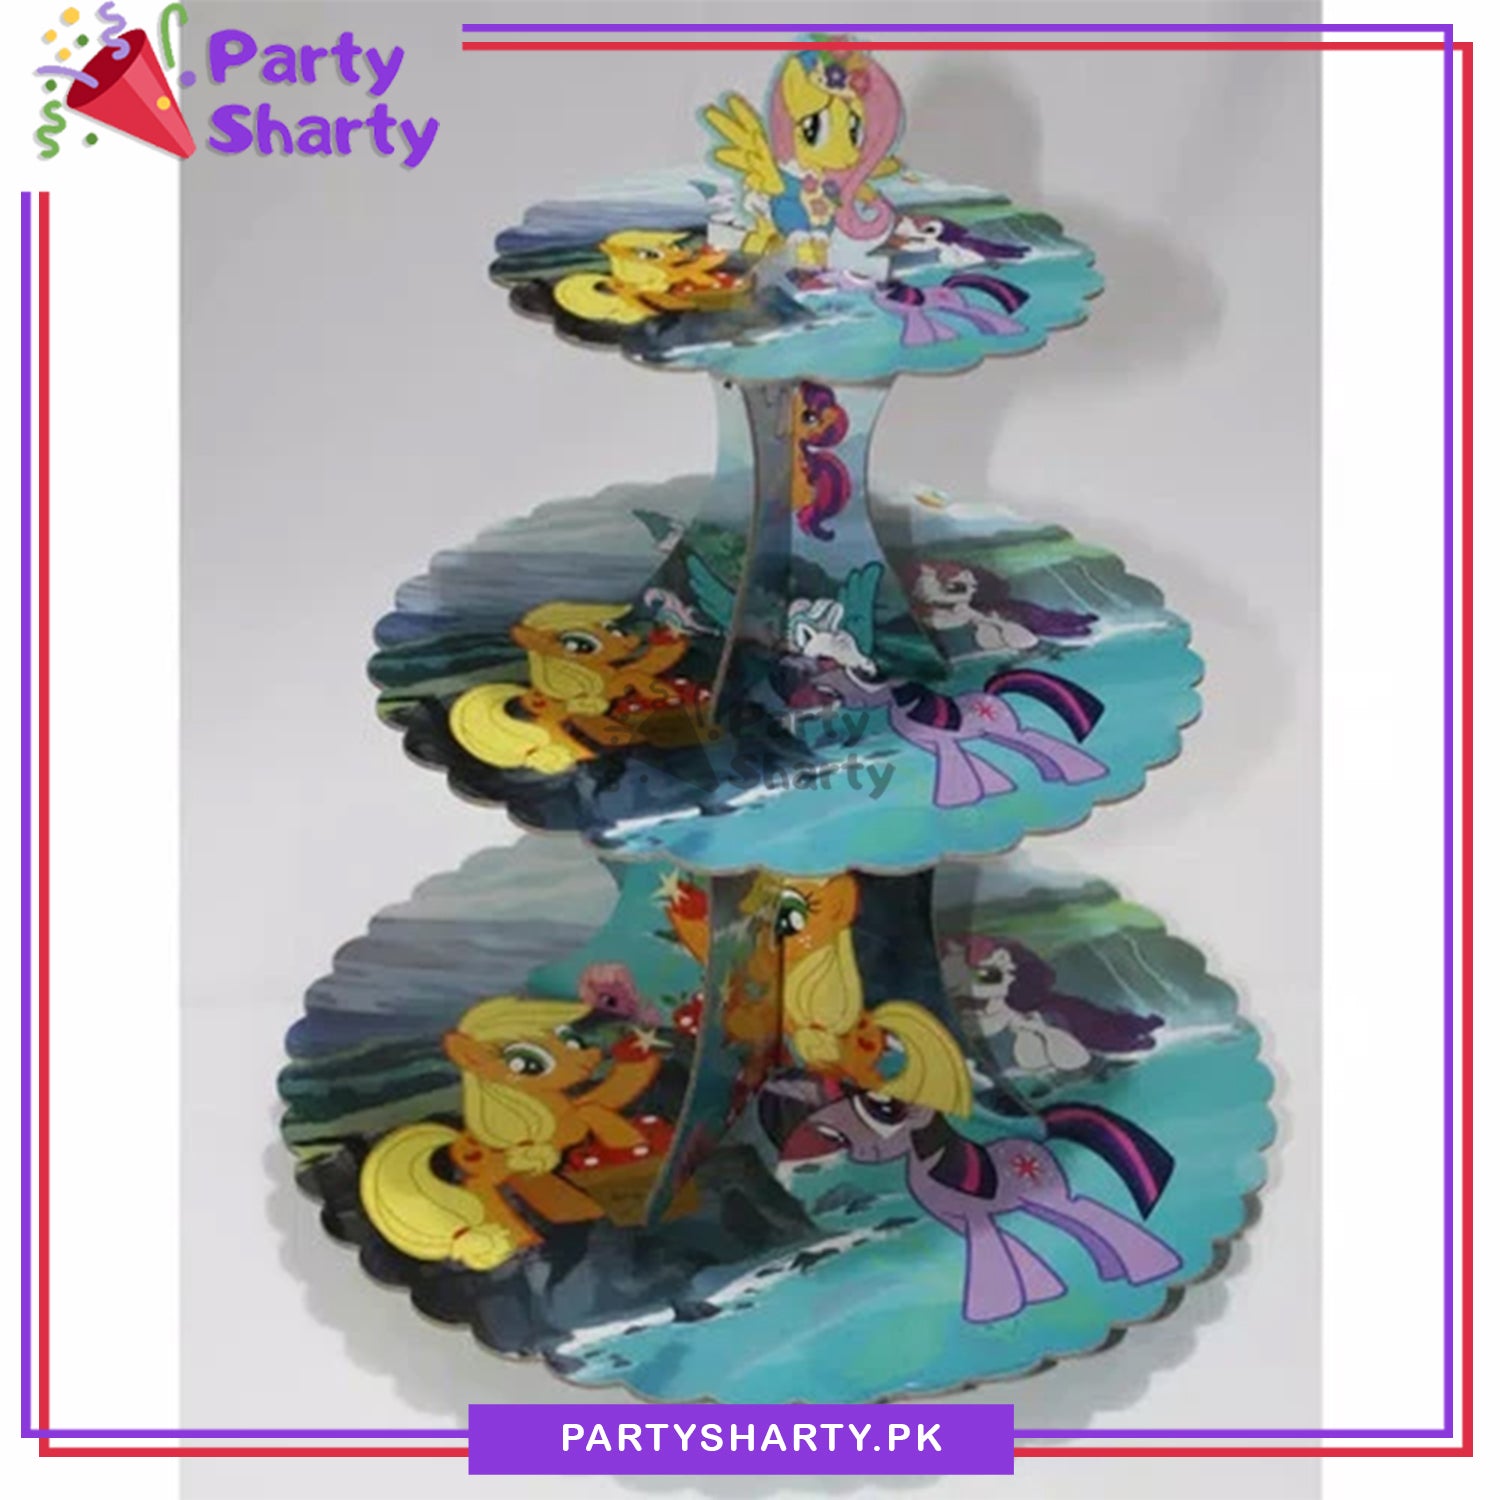 Little Pony Theme Cupcake Stand For Theme Party Decoration and Celebration